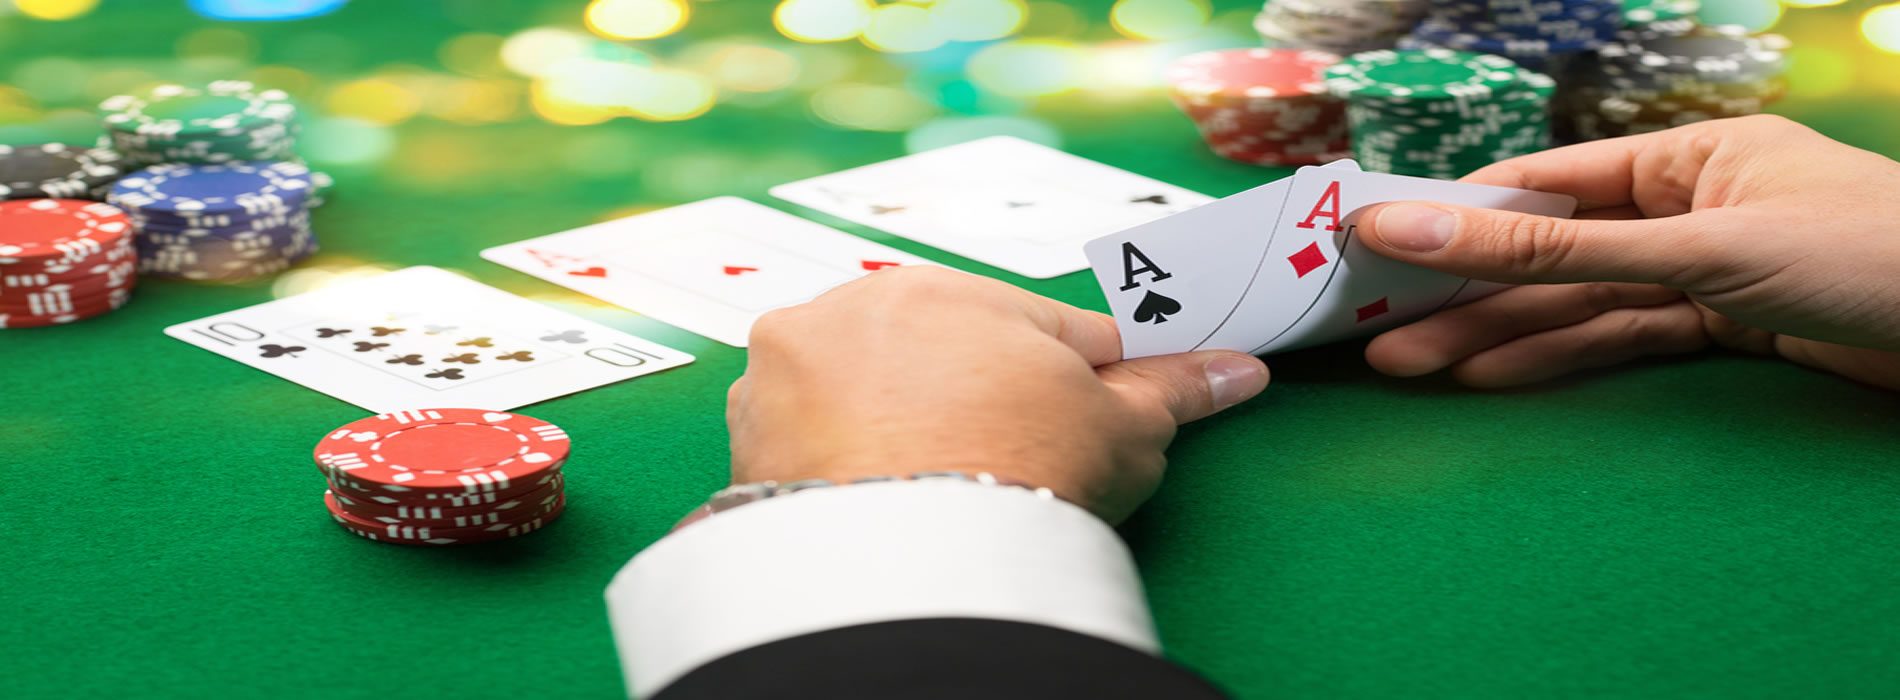 Great Poker Games That You Can Play Quickly! – READ HERE